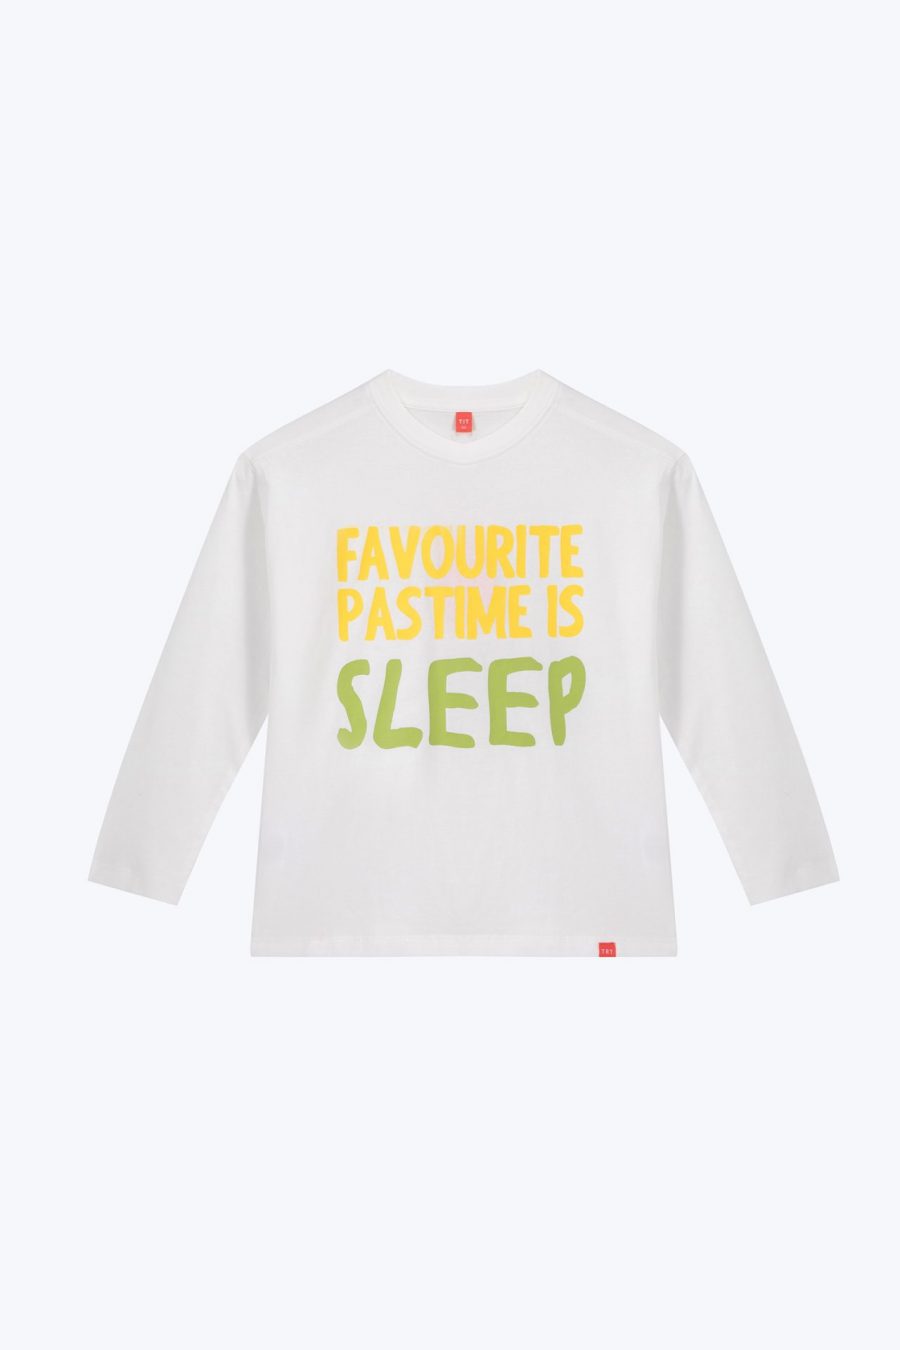 KTL800076D Favourite Pastime Long Sleeve Tee cream